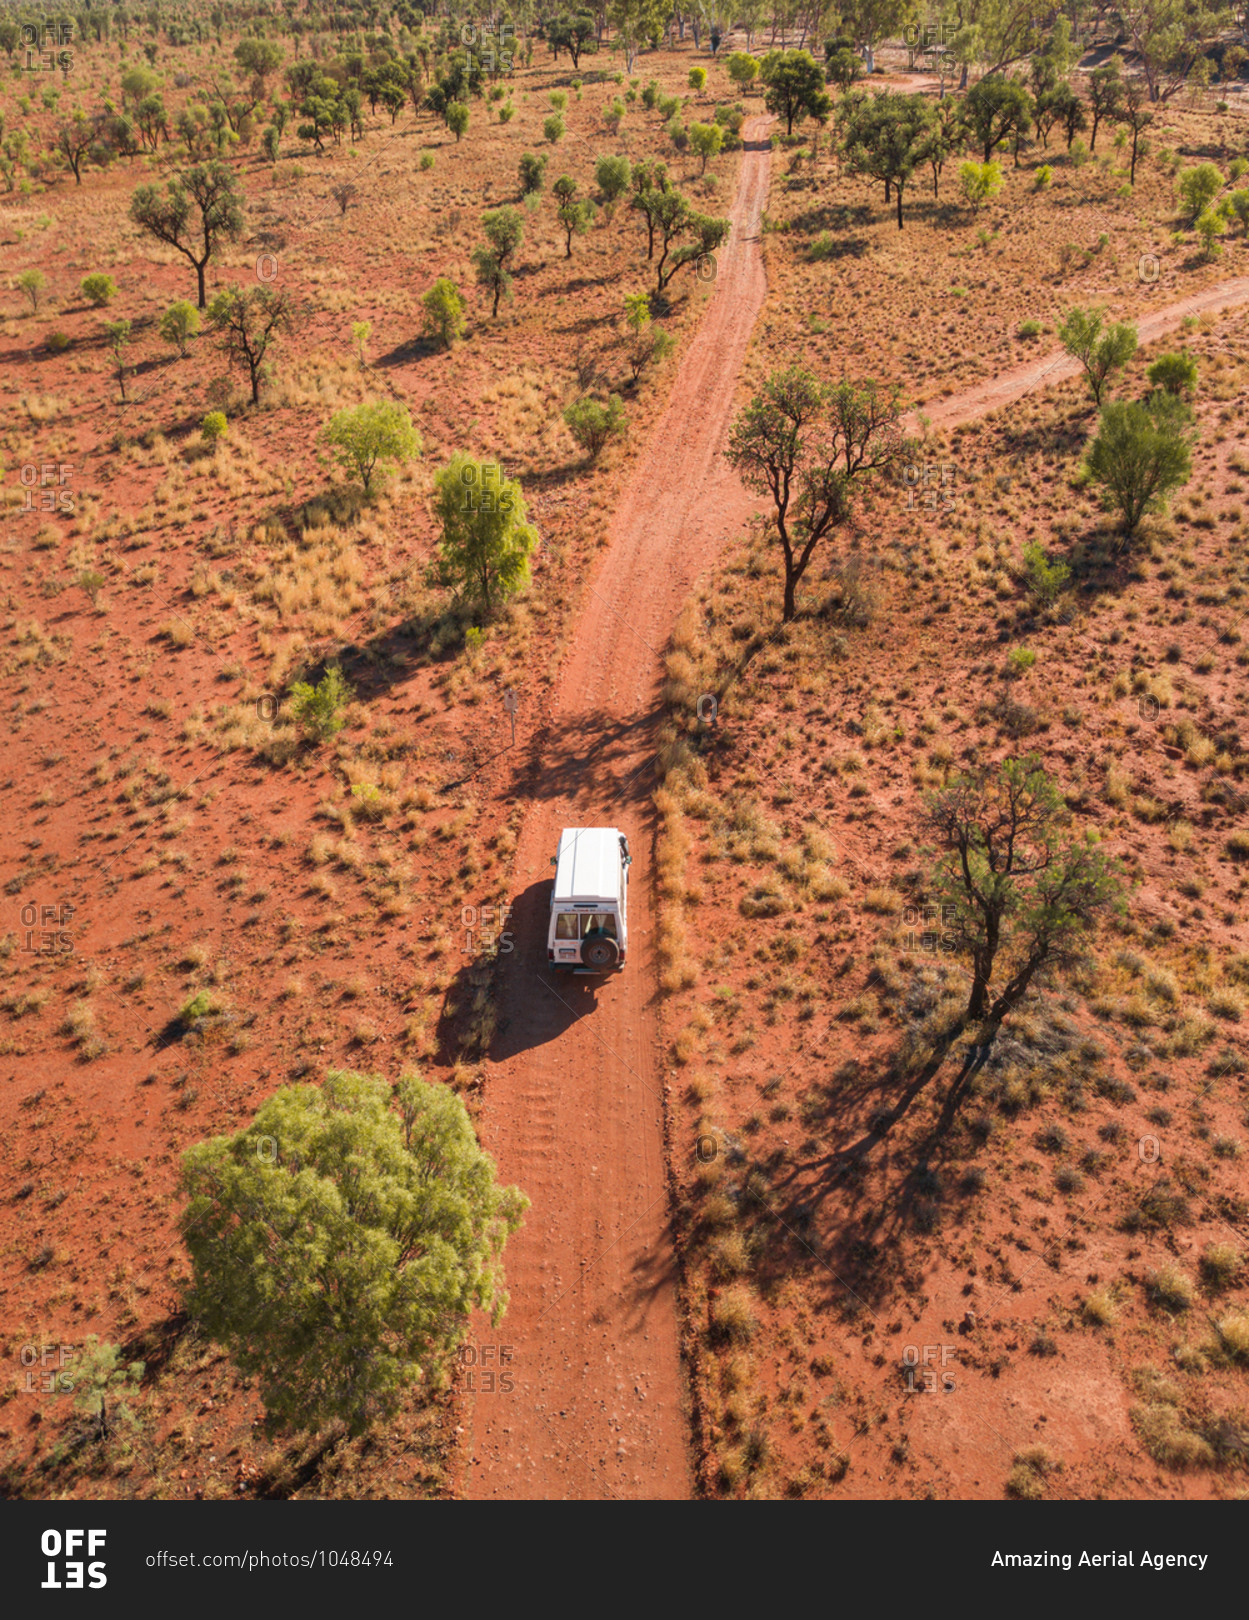 Aerial view of 4x4 truck on off road red dirt track in the outback desert in the Northern Territory, Australia